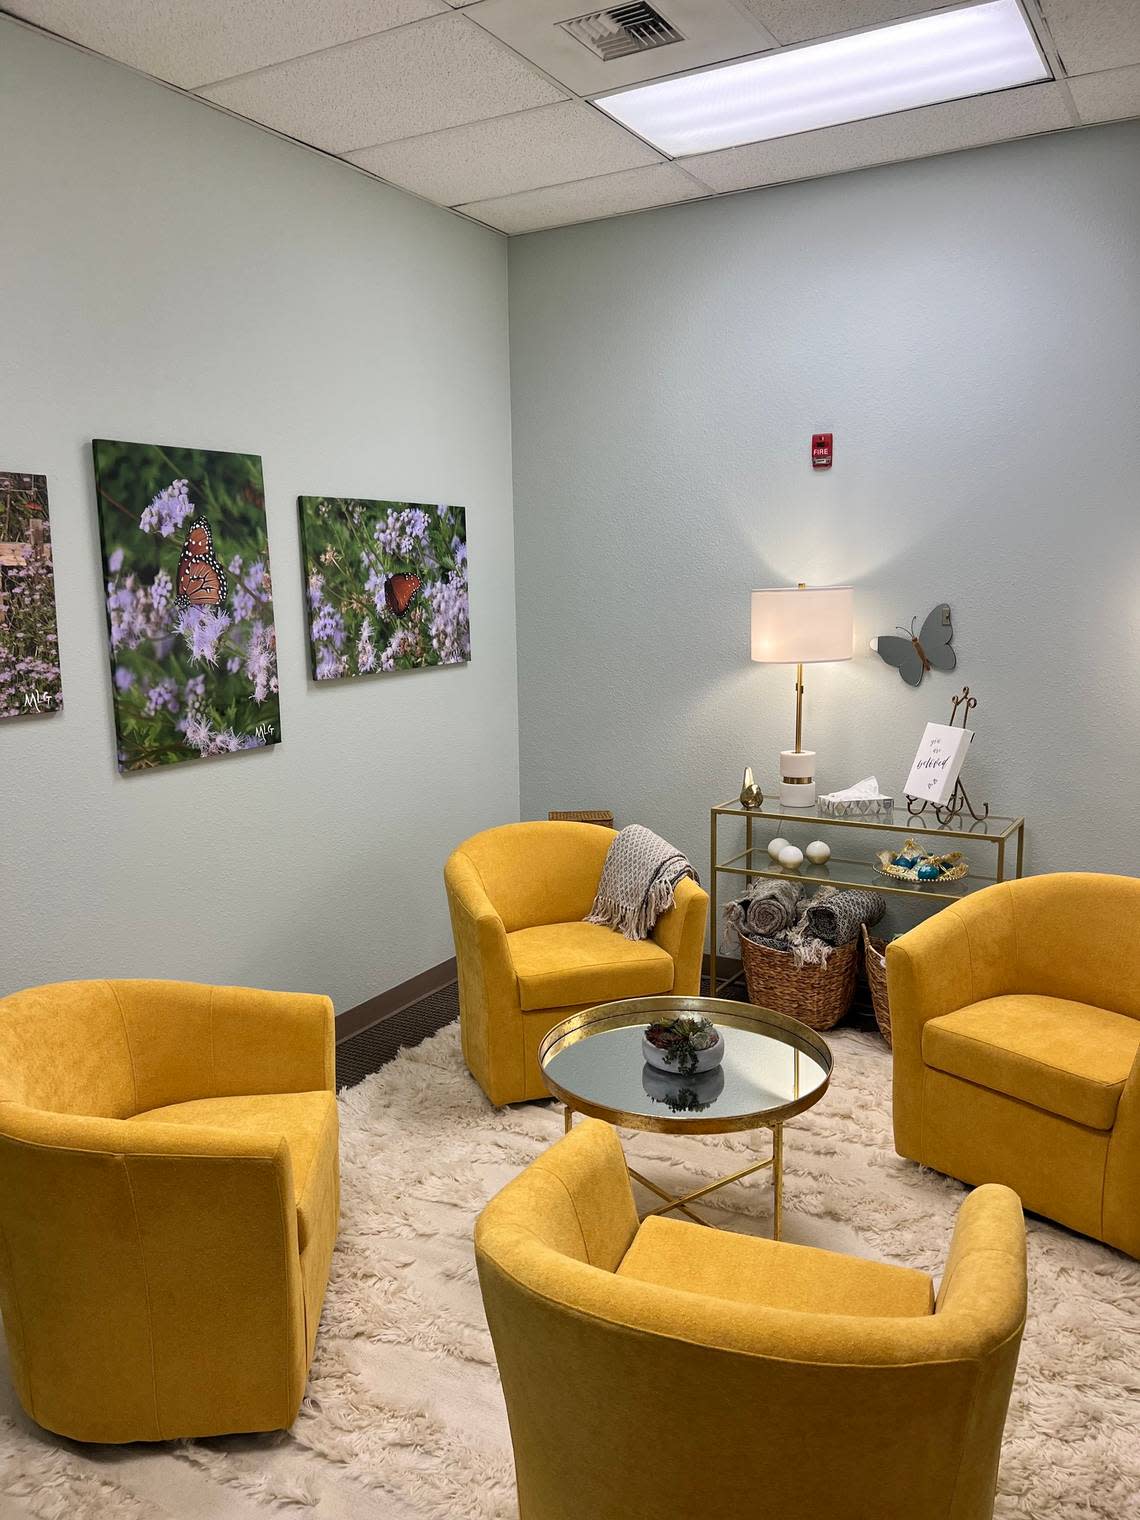 The Sacramento County Sheriff’s Office unveiled new “soft interview rooms” Thursday at their Central Station, 7000 65th St. It’s a room incorporating non-triggering artwork and muted colors to help victims be at ease while talking to law enforcement. Sacramento County District Attorney's Office